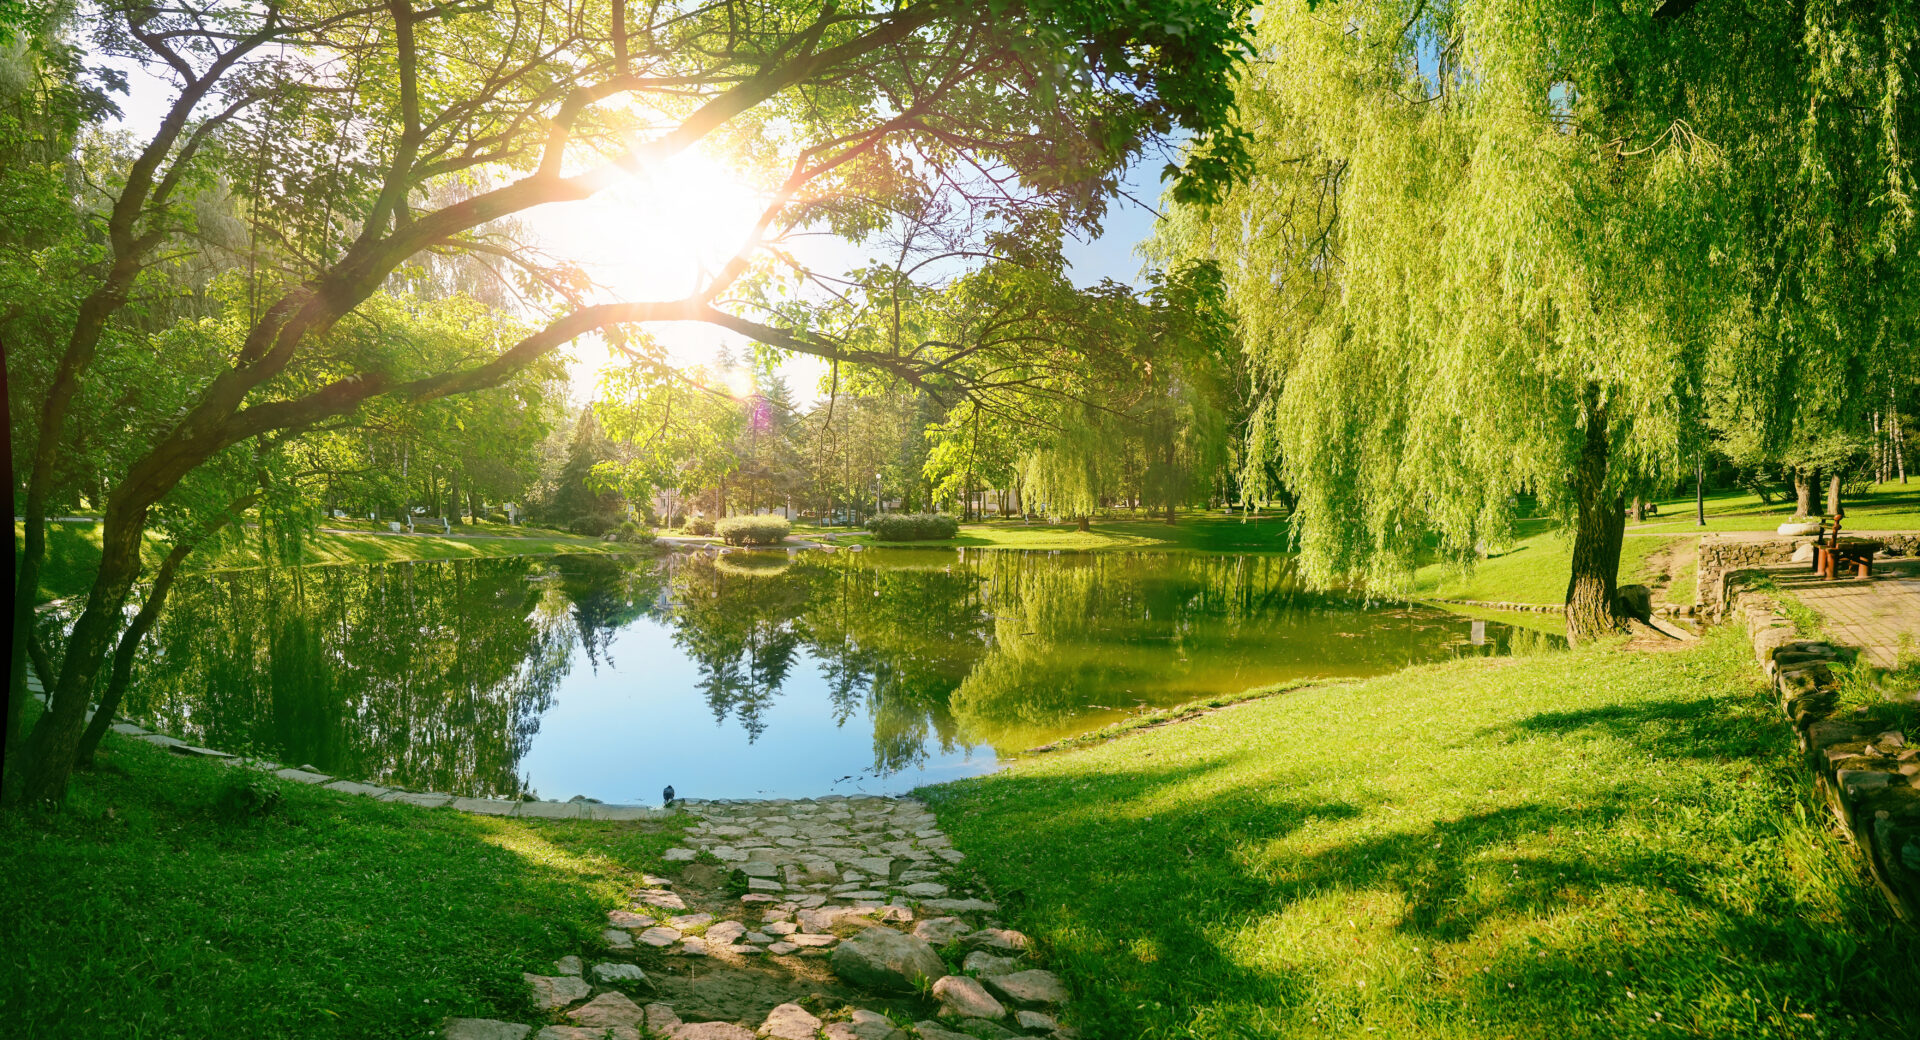 Pond in a city park with greens and sun shining through trees